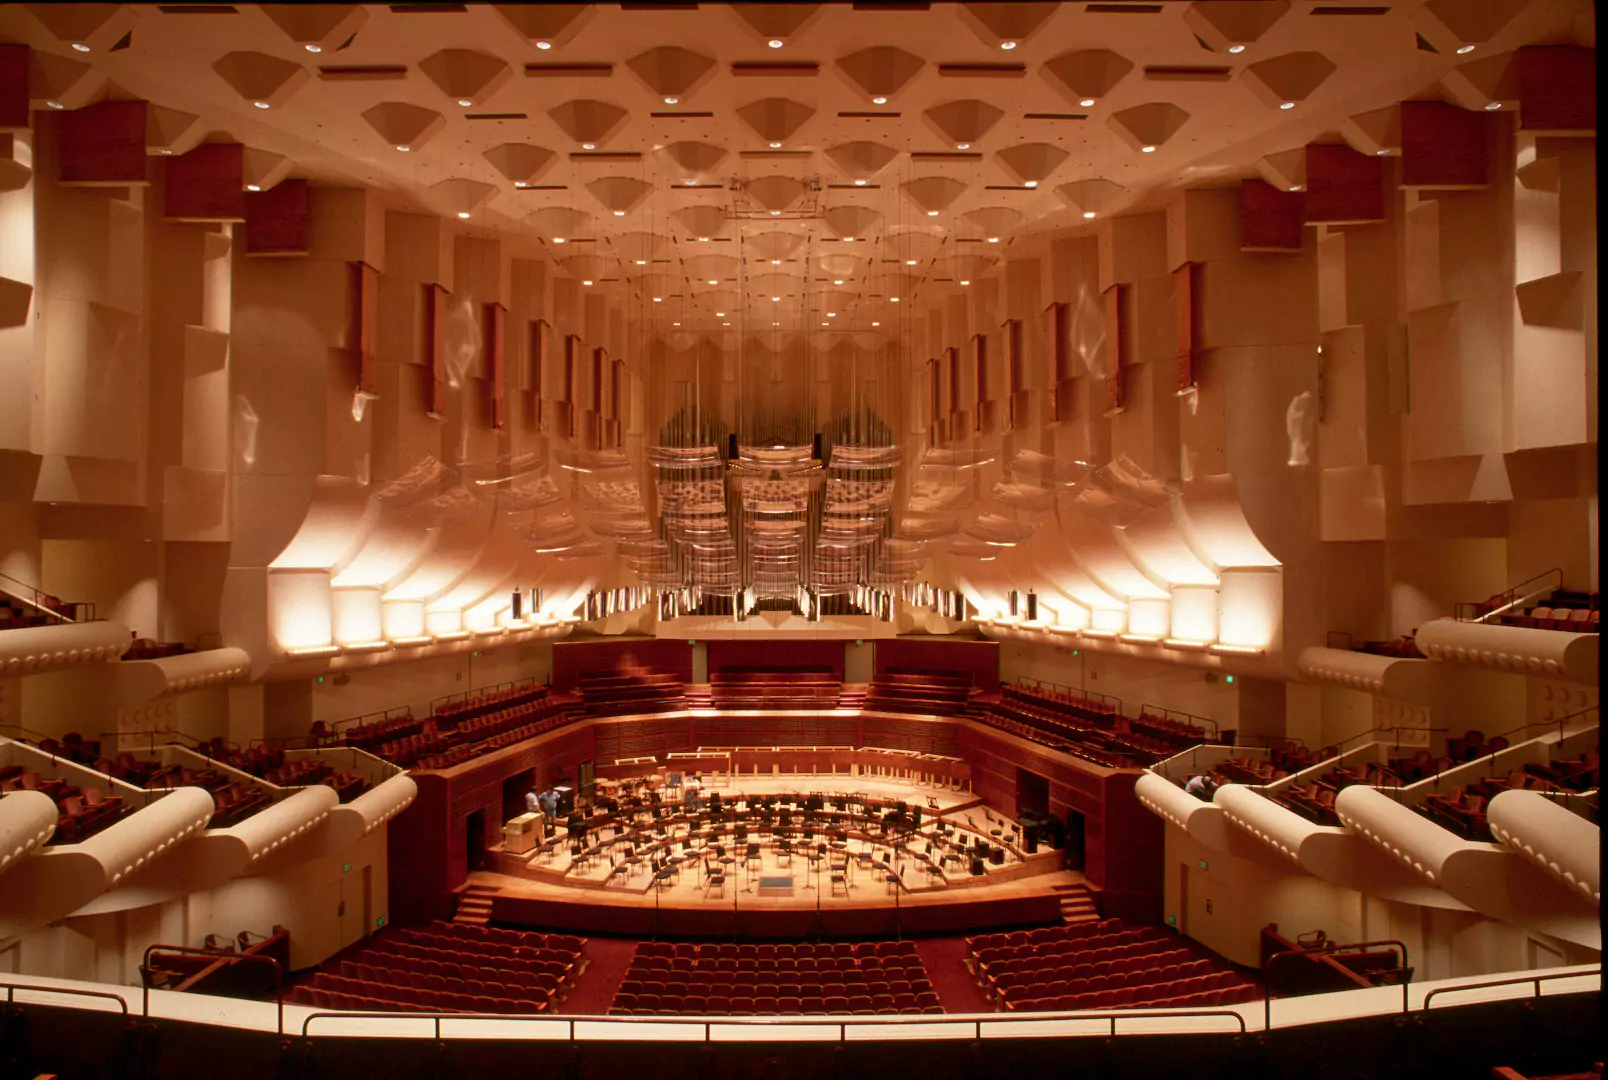 View of the interior of Davies Symphony Hall in San Francisco featuring red seating, warmly lit up interior, ceiling acoustics system, premier balcony box seating, and soaring ceilings